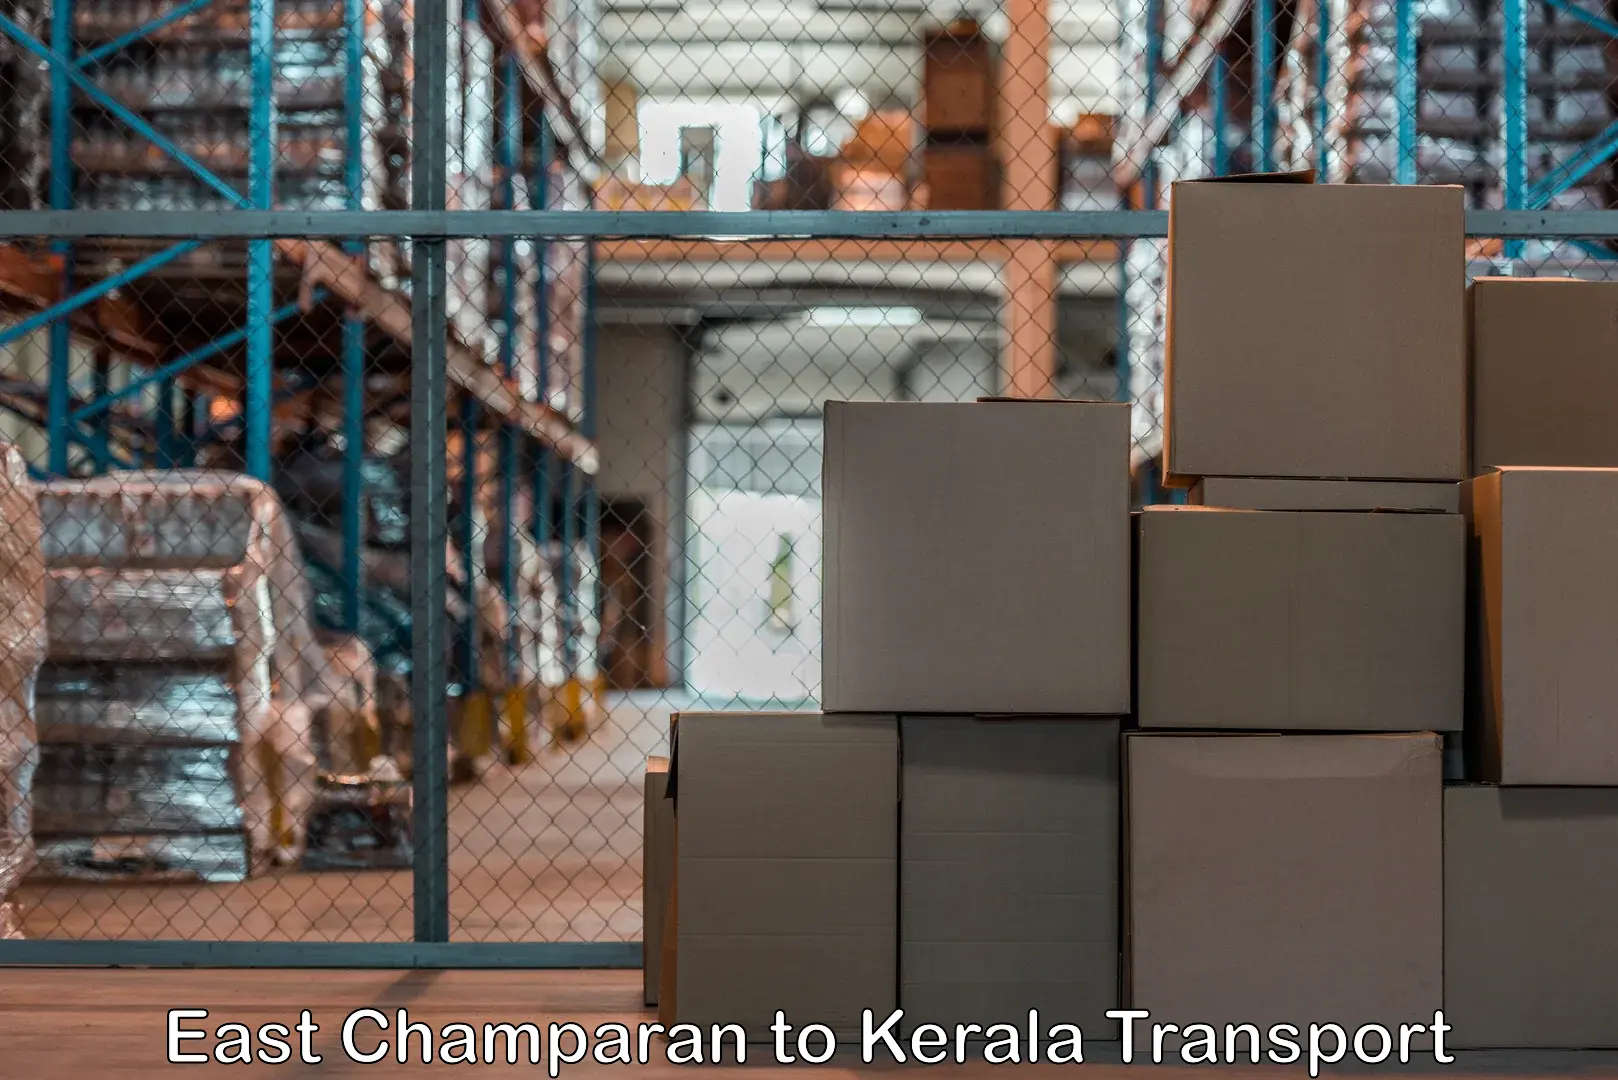 Cargo train transport services East Champaran to Wayanad